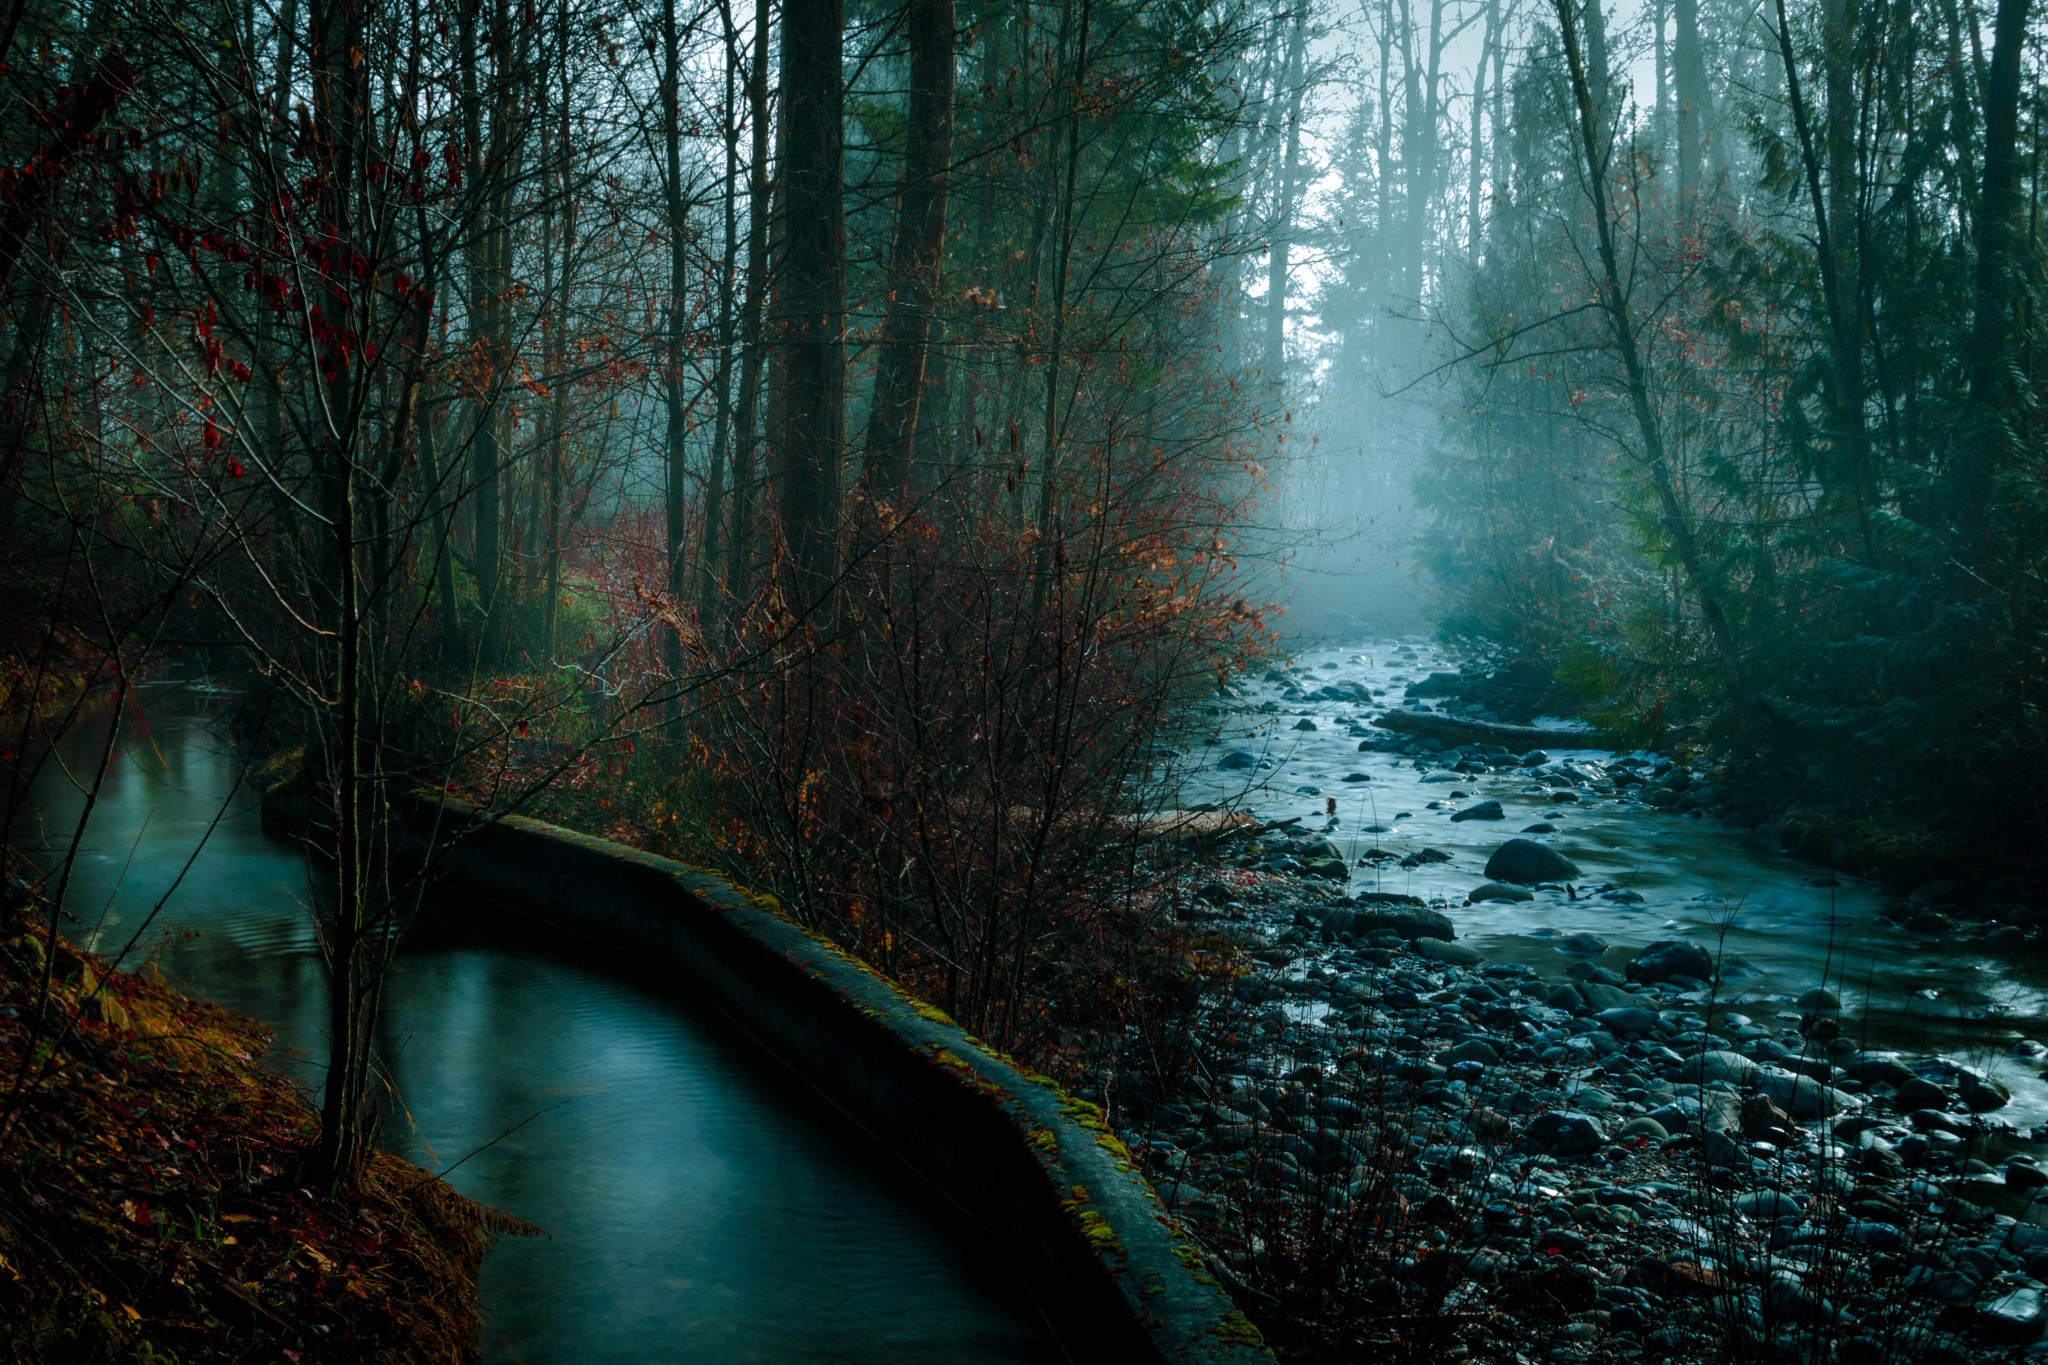 General 2048x1365 nature photography dark trees mist plants flowers fall rocks river water canal